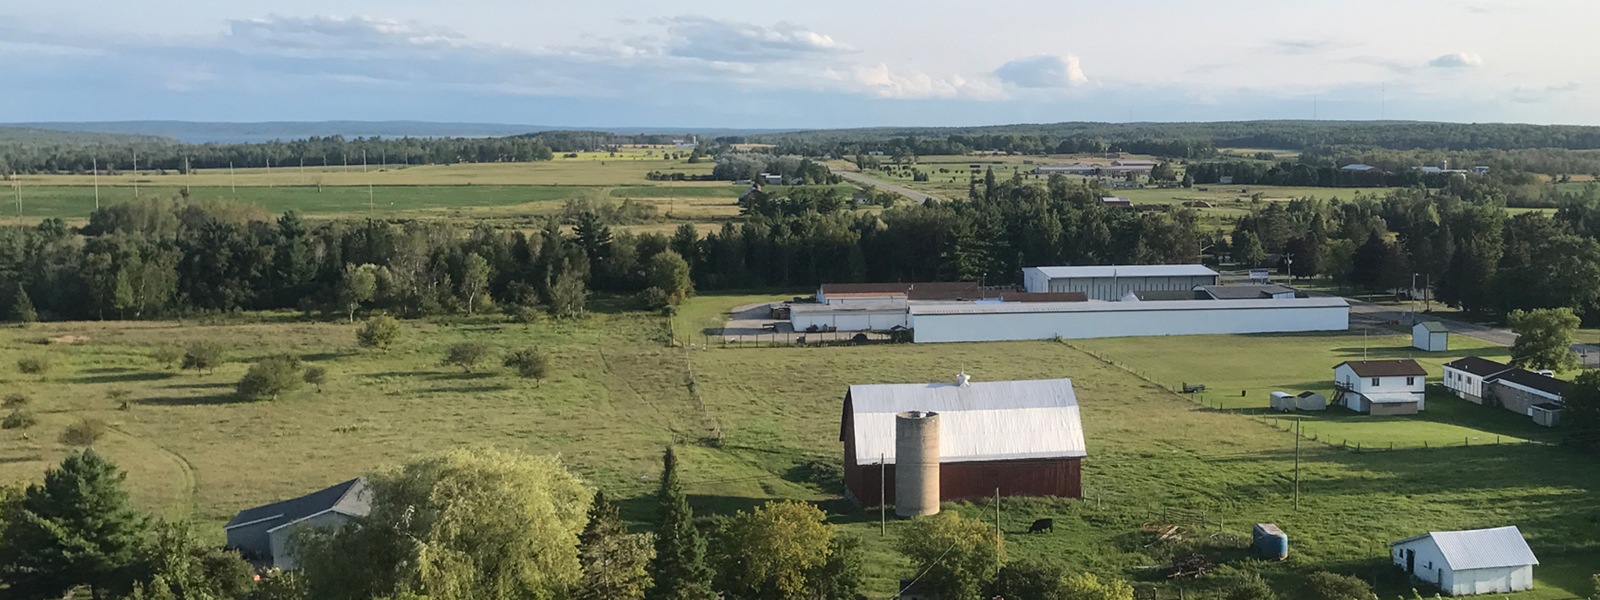 Aerial view of a farm -- green pastures, barns, and grazing cattle.